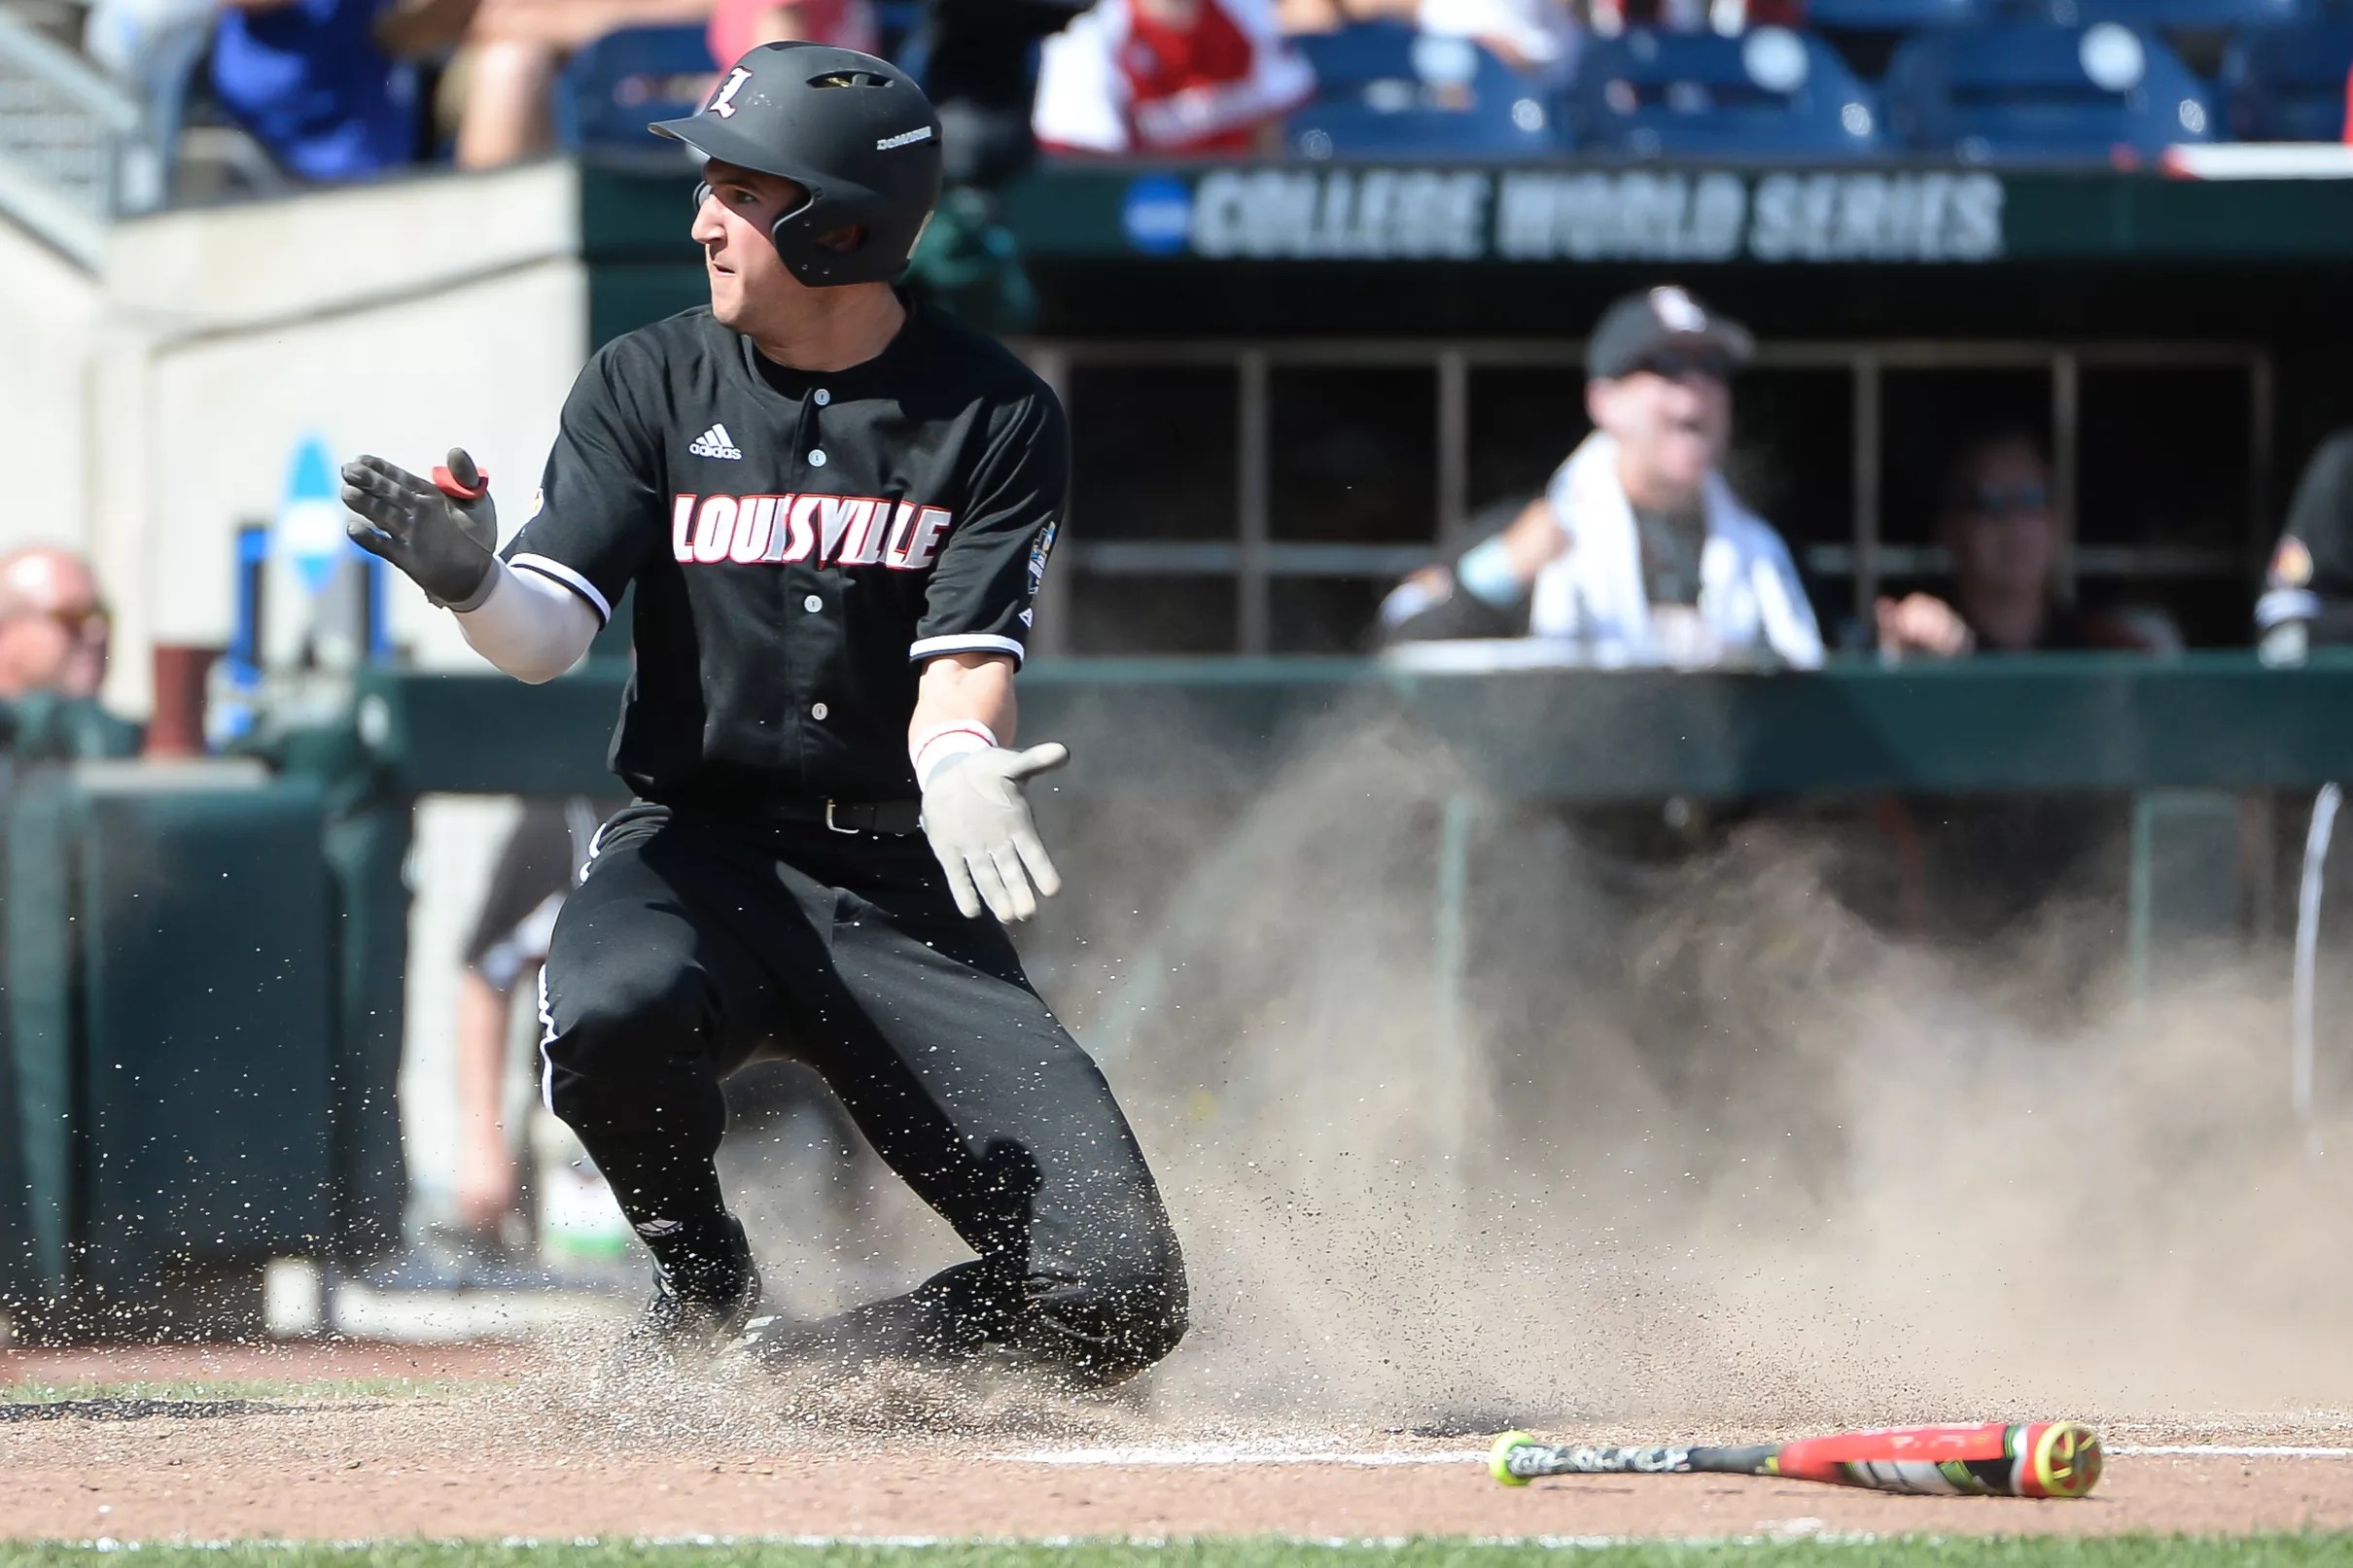 Louisville baseball tickets are half-price for the next 48 hours